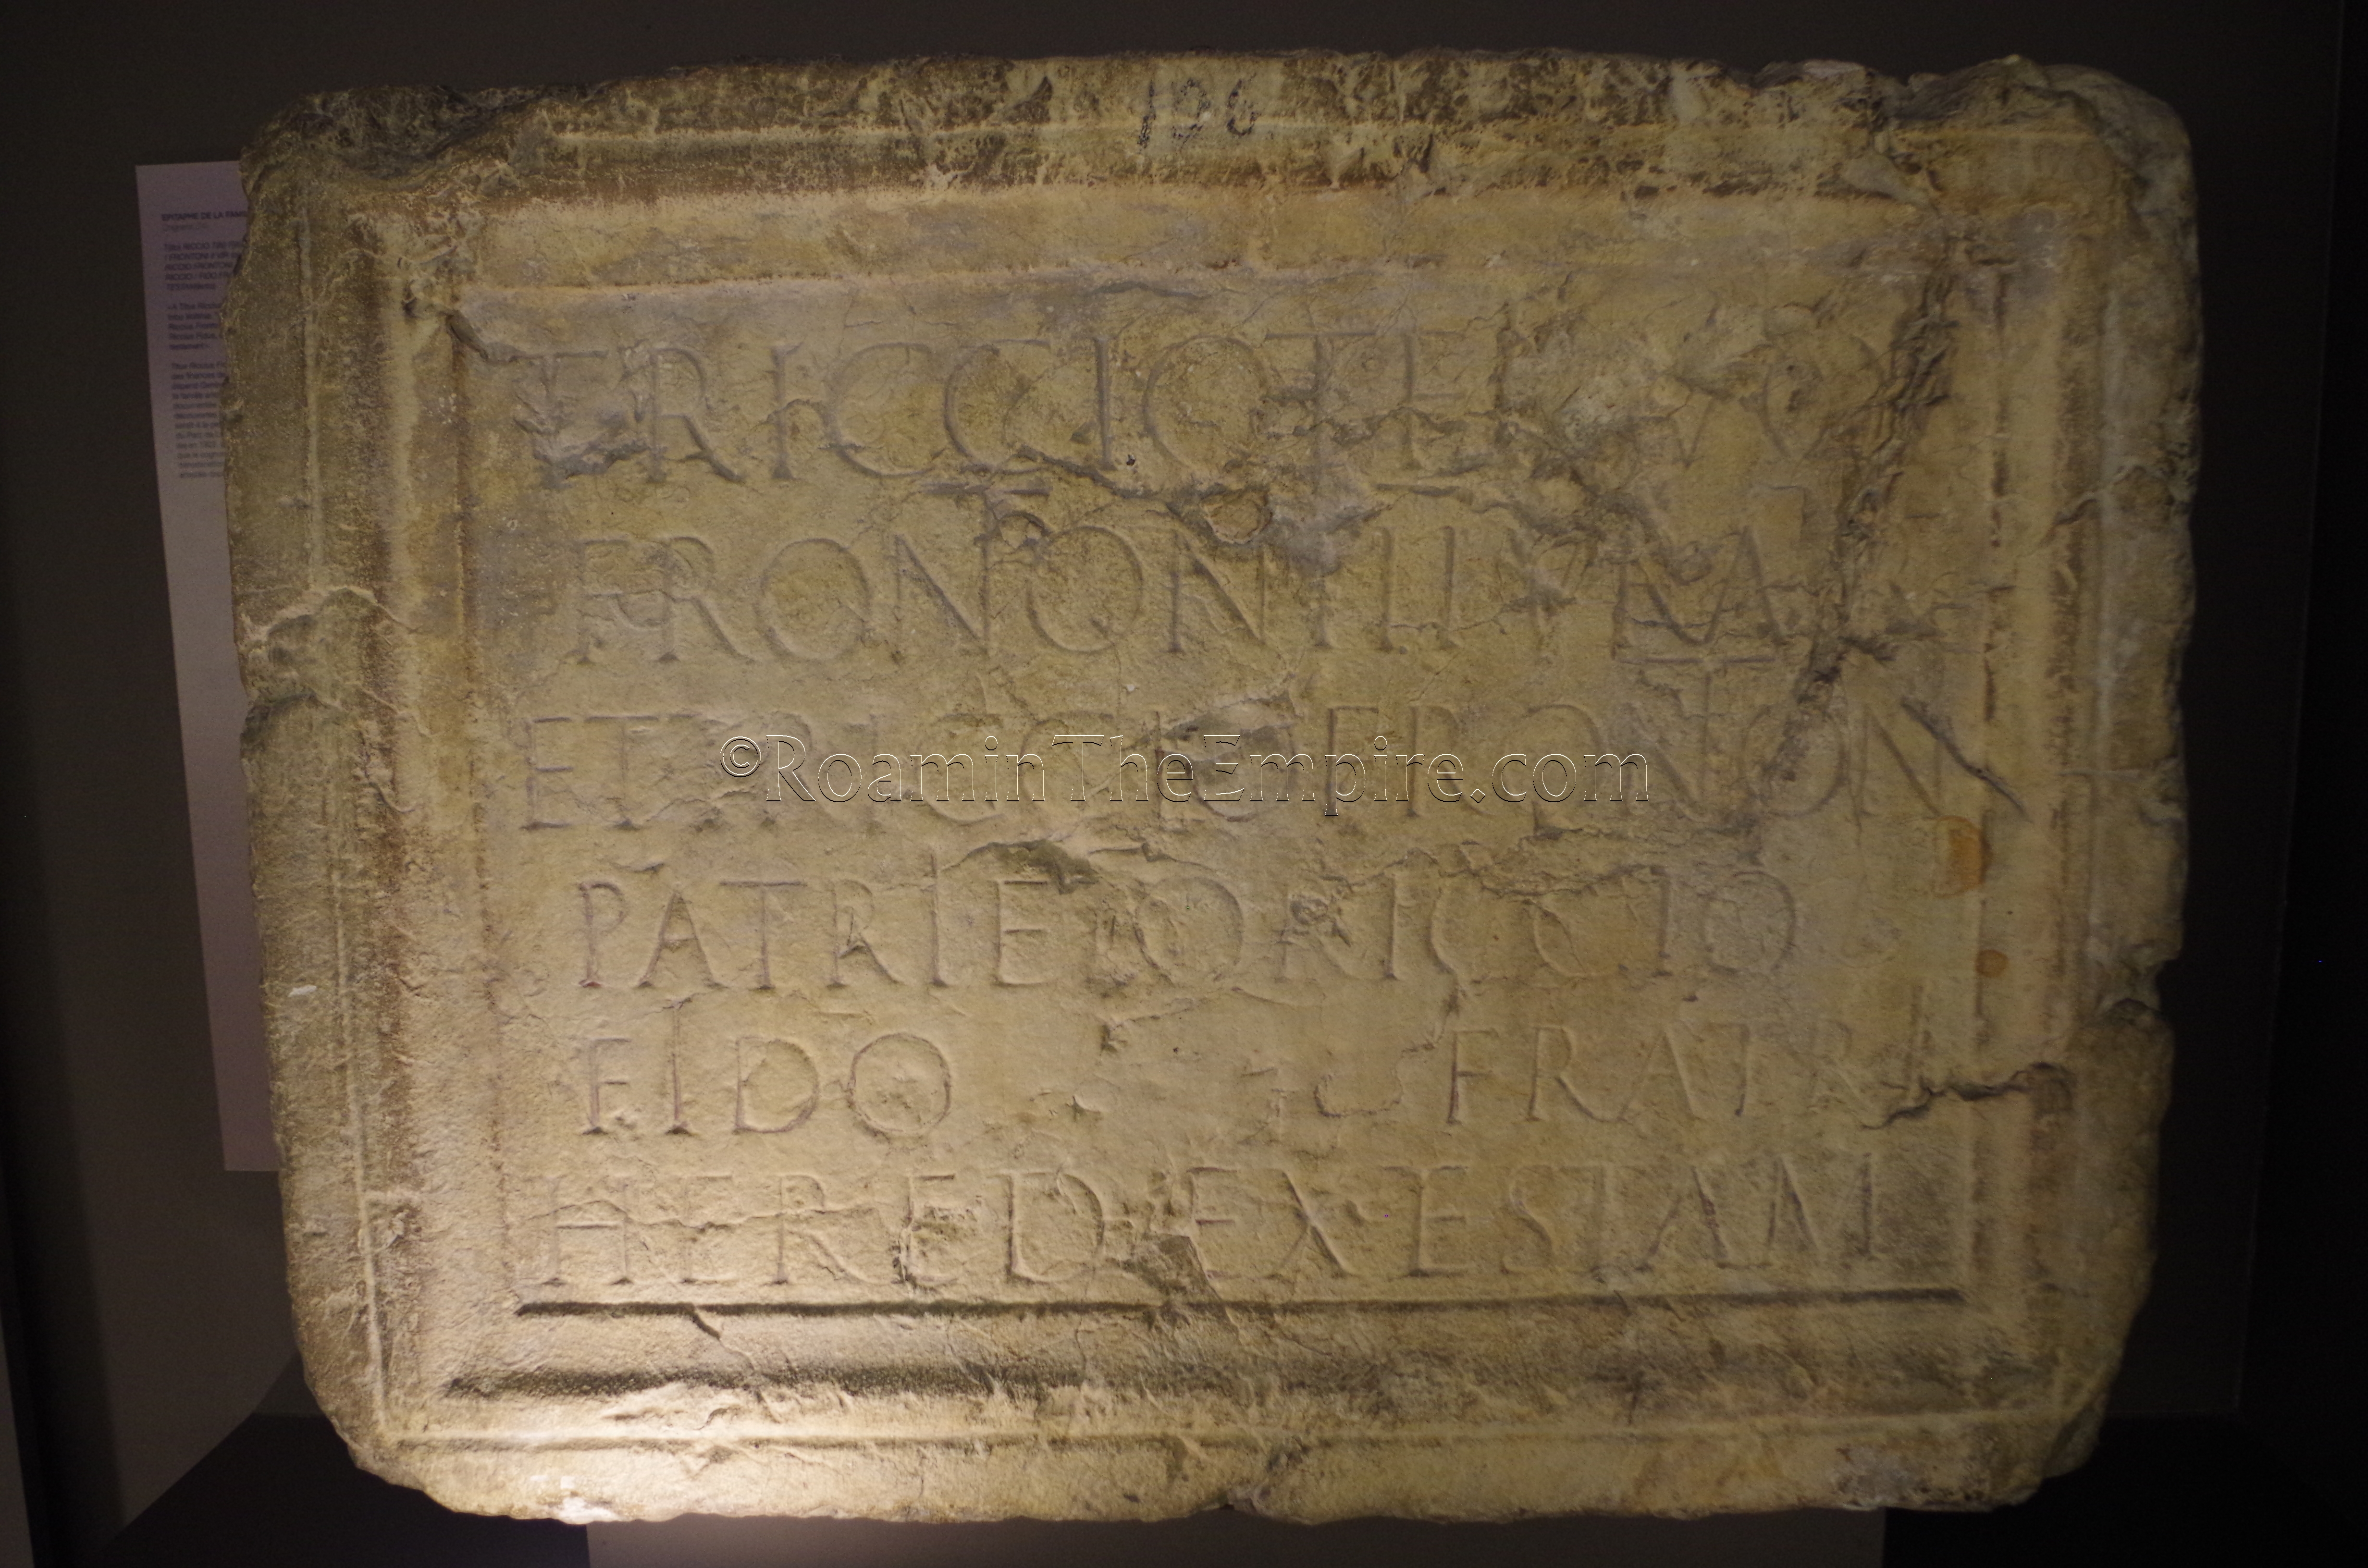 Funerary inscription from the family of Titus Riccius Fronto, displayed in the Musée d'Art et d'Histoire. Genava. Geneva.